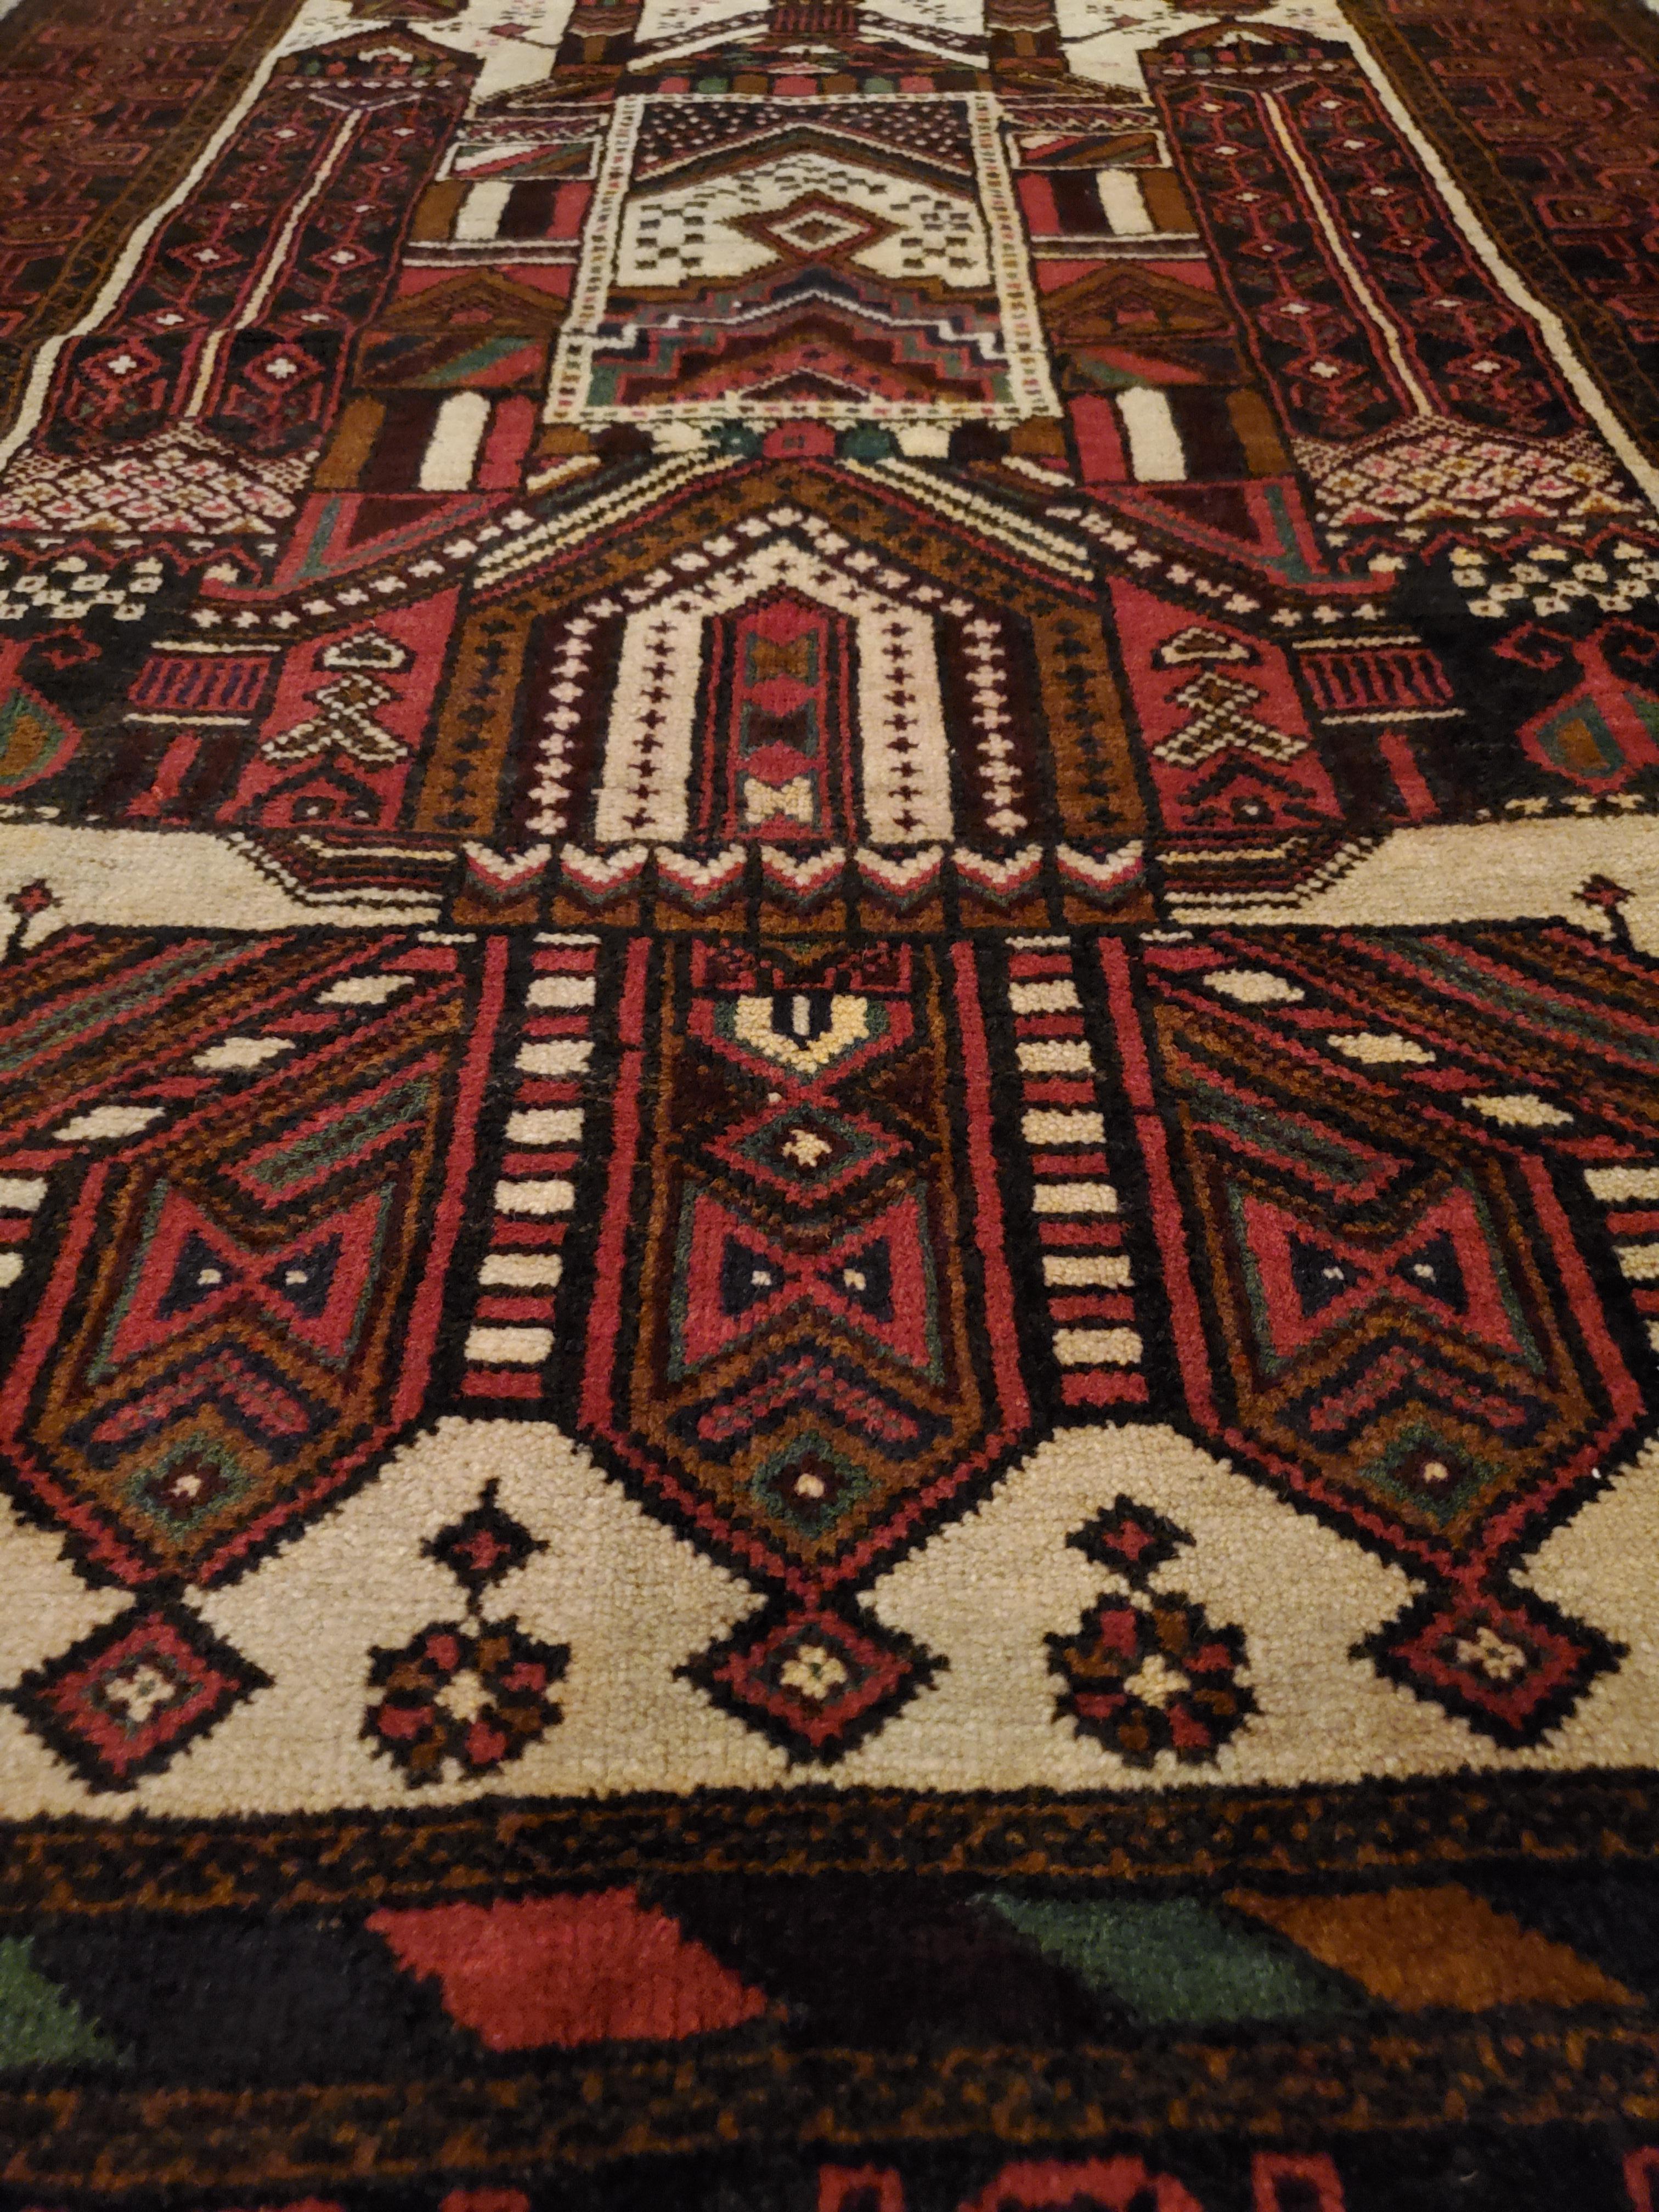 Medium to Large Size Afghan Area Carpet / Rug, Colorful / 372 In New Condition For Sale In Orlando, FL